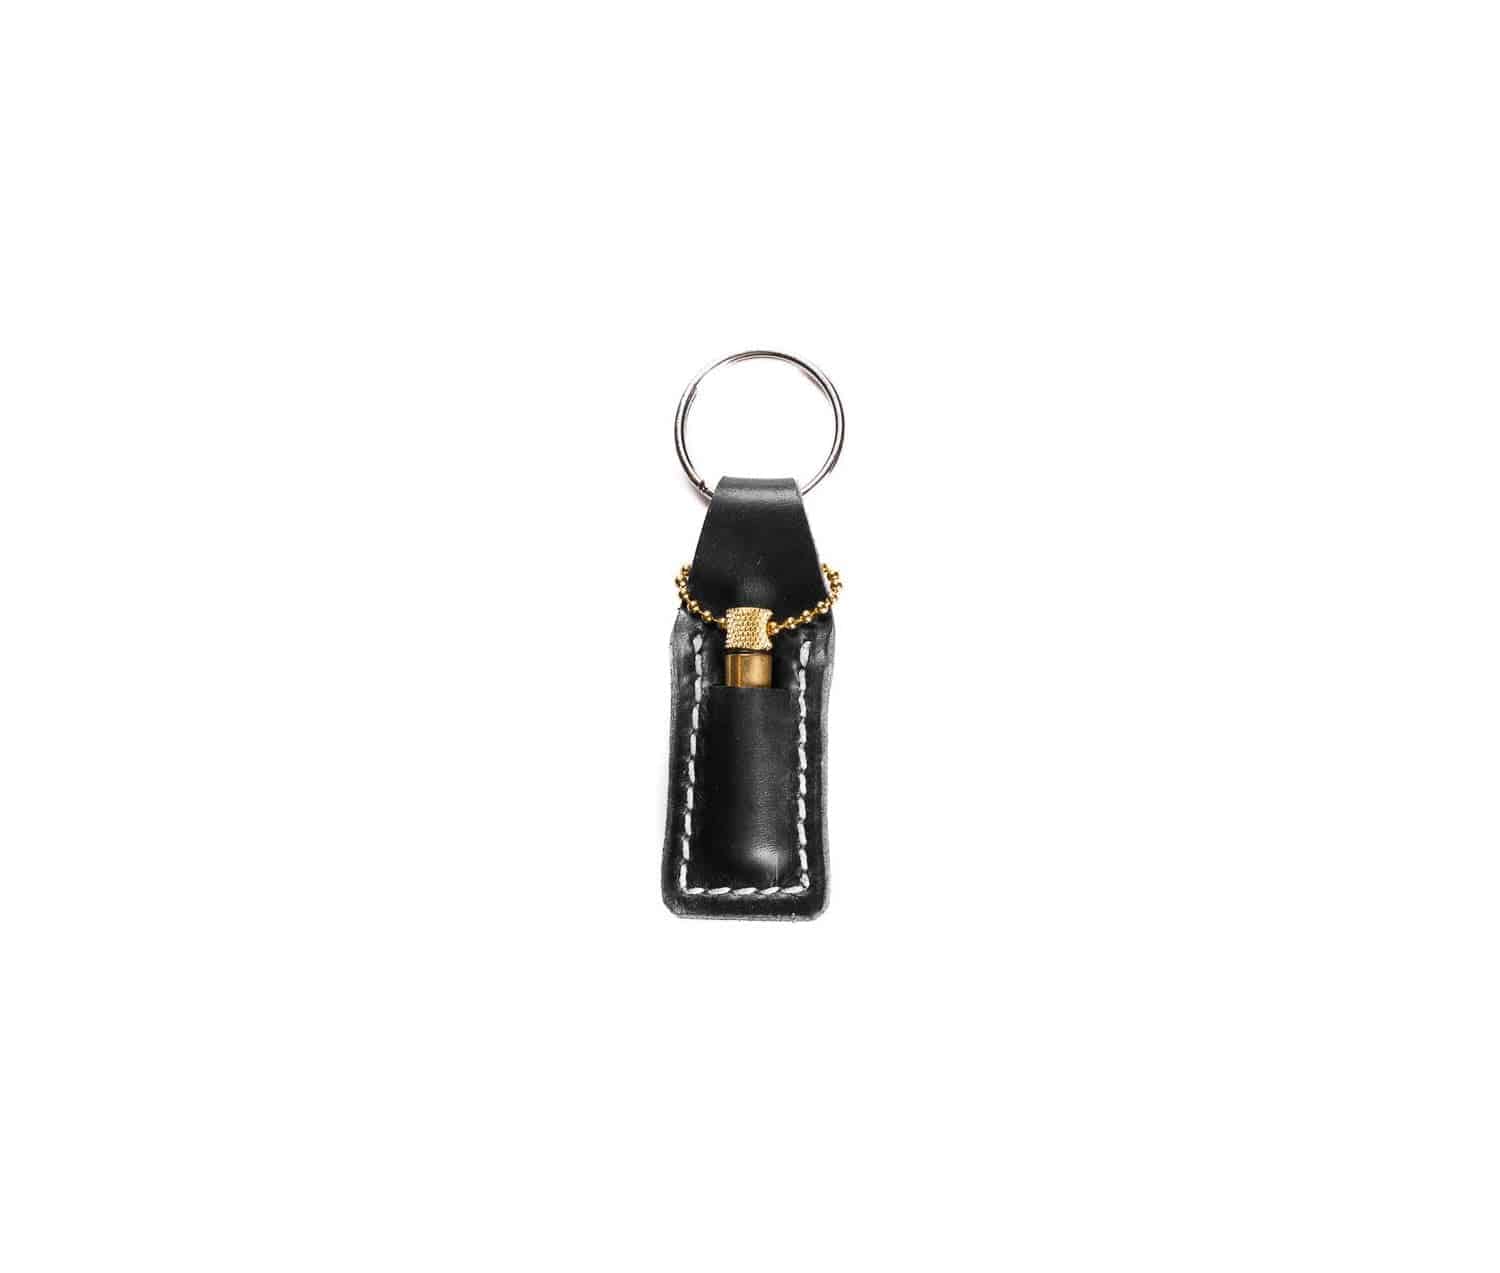  Oil Vial by Lifetime Leather Co Lifetime Leather Co Perfumarie